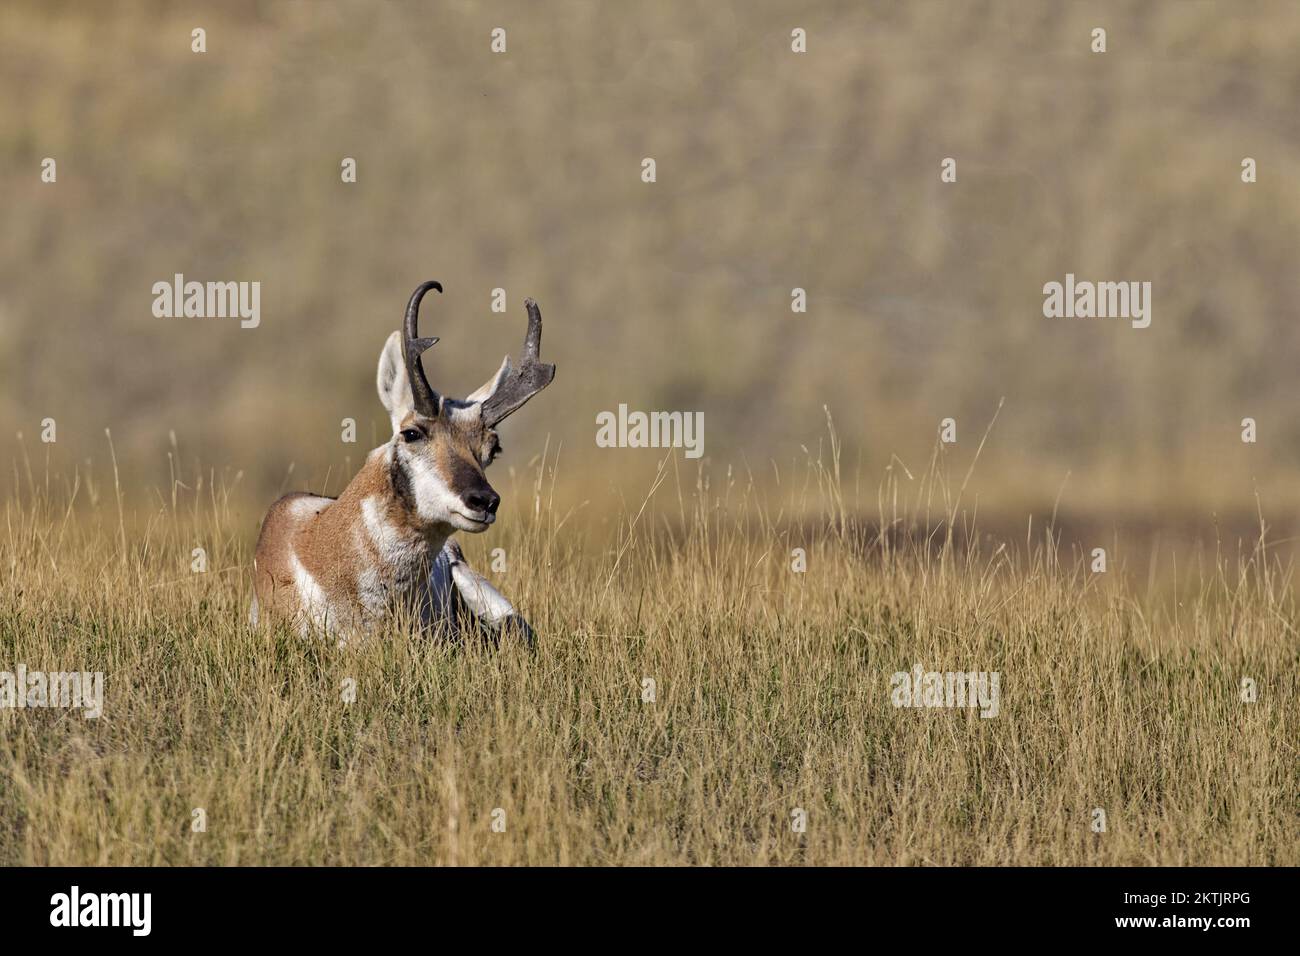 Alert pronghorn antelope tilts head while seated in dry grass along Prairie Drive in Bison Range refuge in western Montana on Flathead Indian Reservat Stock Photo